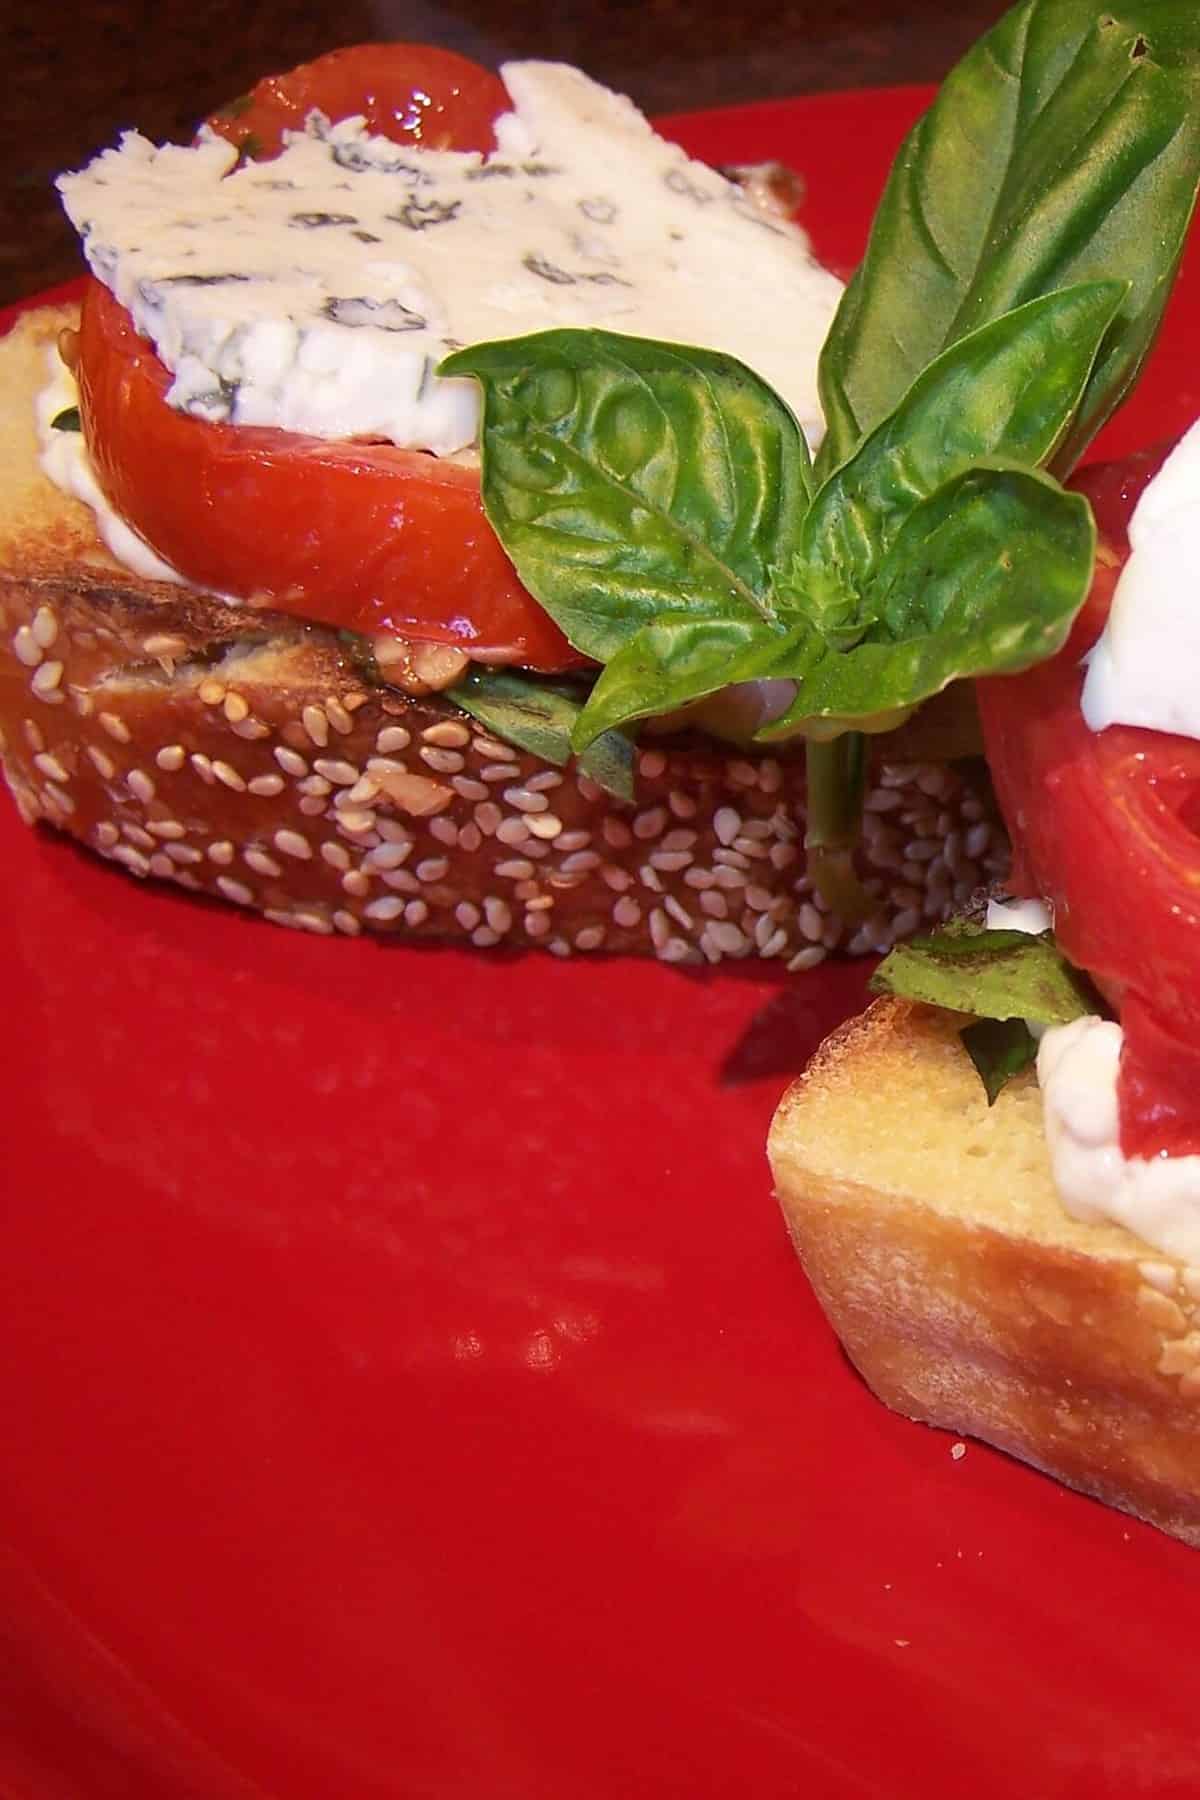 Smoked Tomato Sandwiches With Goat Cheese and Basil Recipe